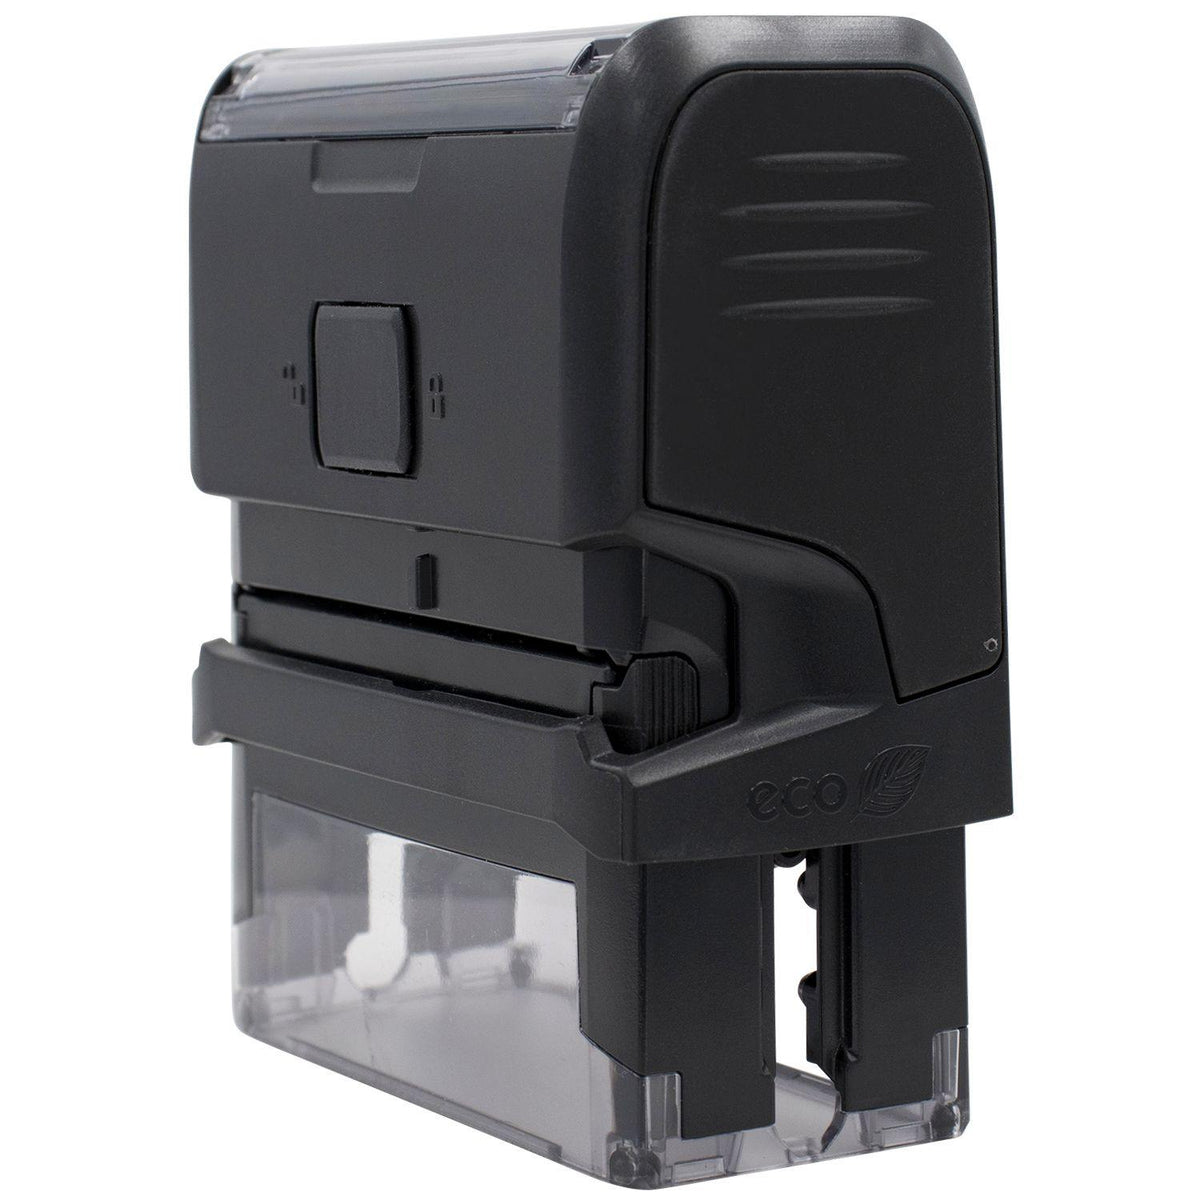 Large Self-Inking Skinny To the Parents of Stamp - Engineer Seal Stamps - Brand_Trodat, Impression Size_Large, Stamp Type_Self-Inking Stamp, Type of Use_Teacher